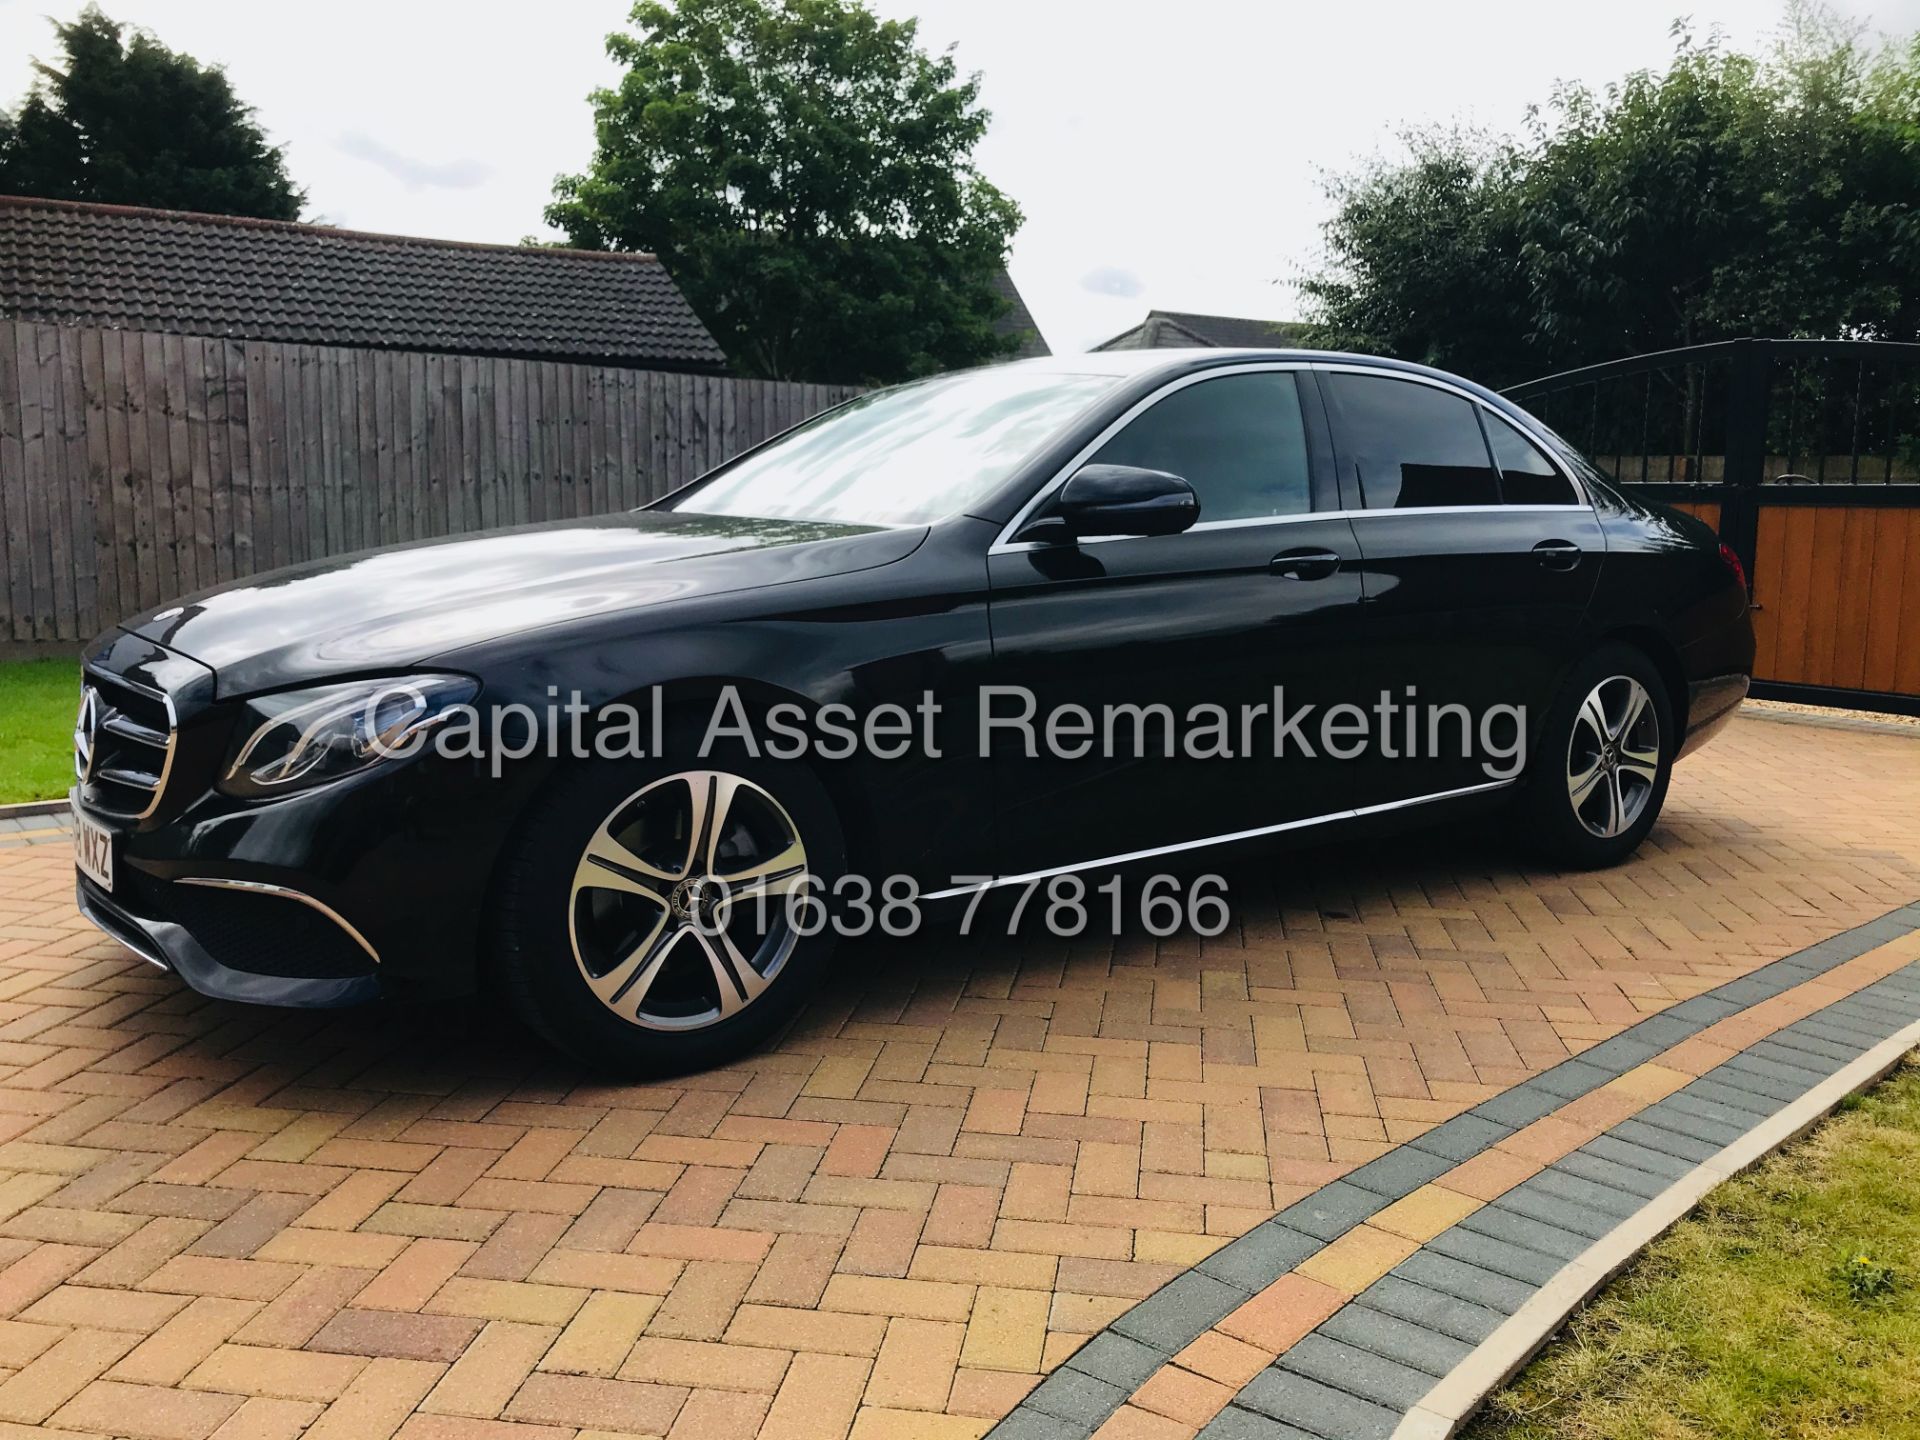 (On Sale) MERCEDES E220d "SPECIAL EQUIPMENT" AUTO (2019) 1 OWNER *GREAT SPEC* TAKE A PEEK - Image 7 of 35